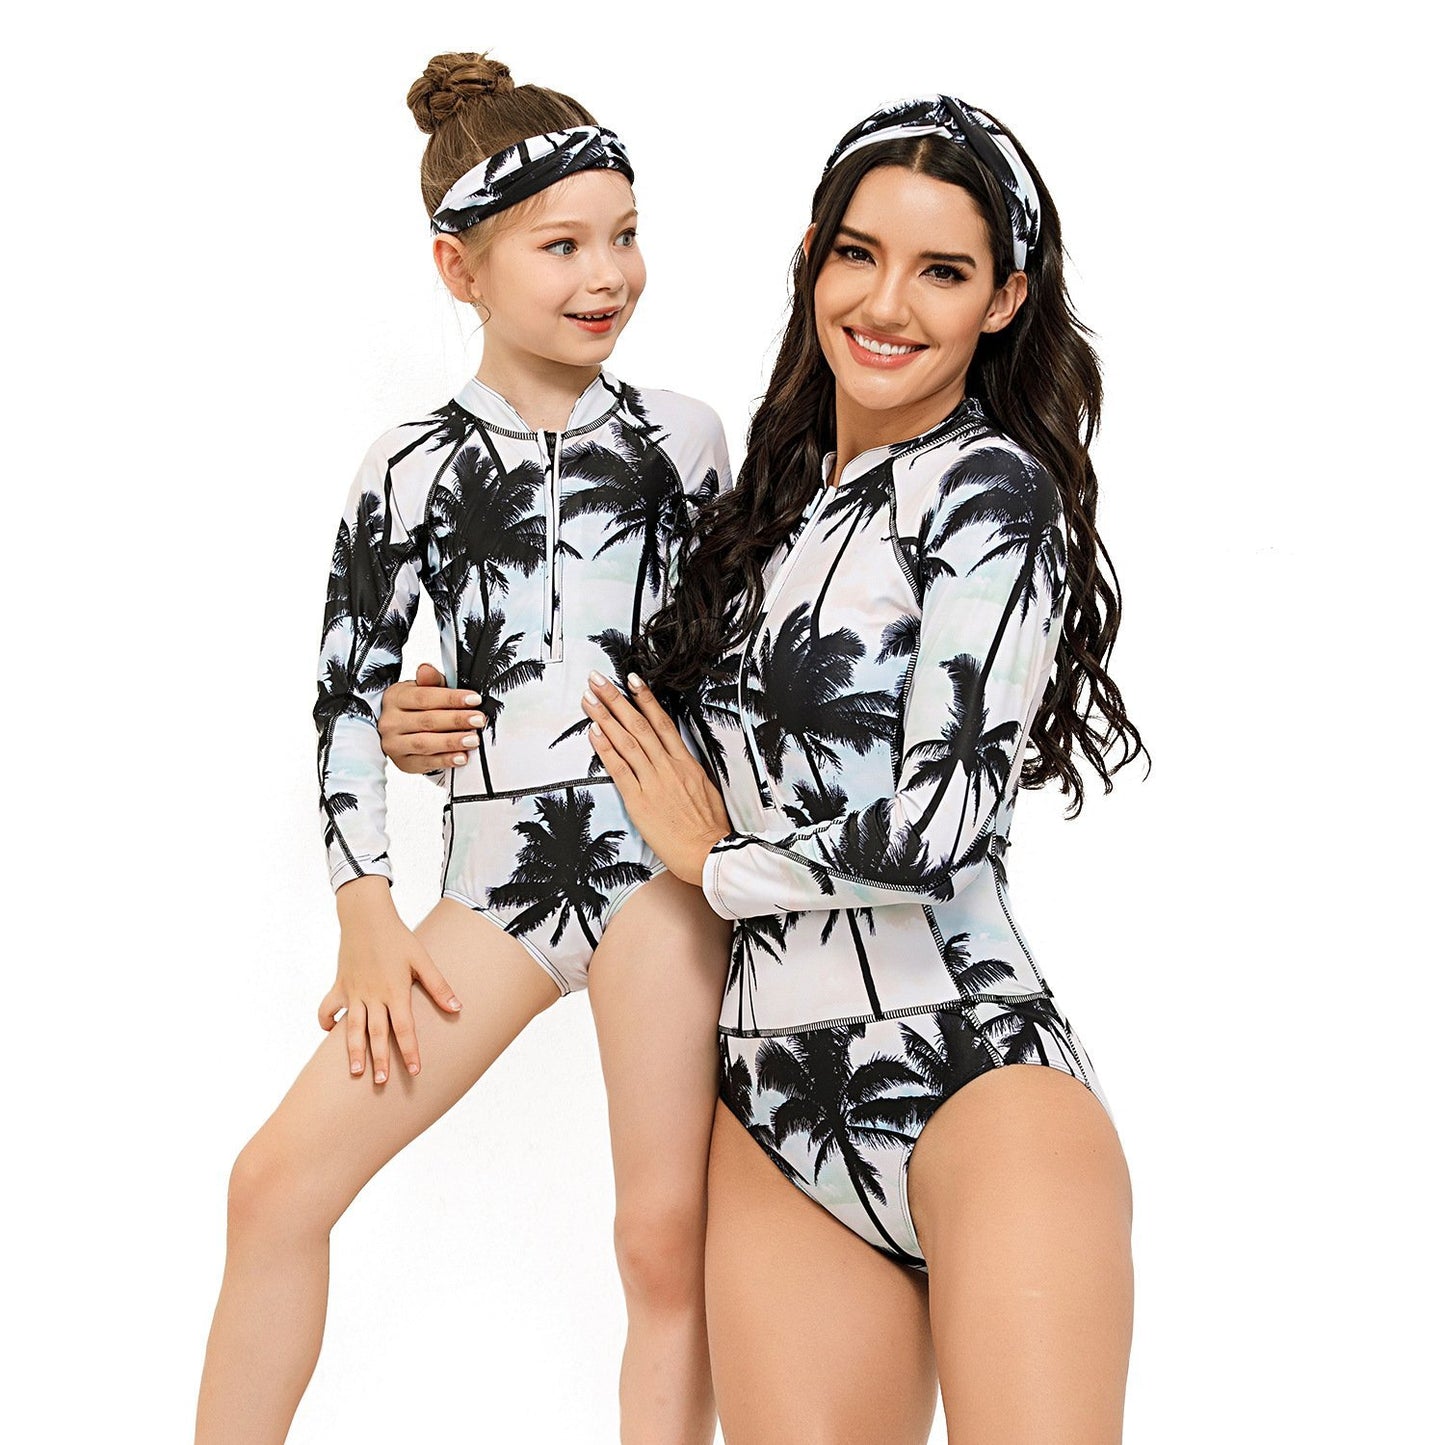 Parent and Child One-piece Surfsuit Diving Suit-STYLEGOING